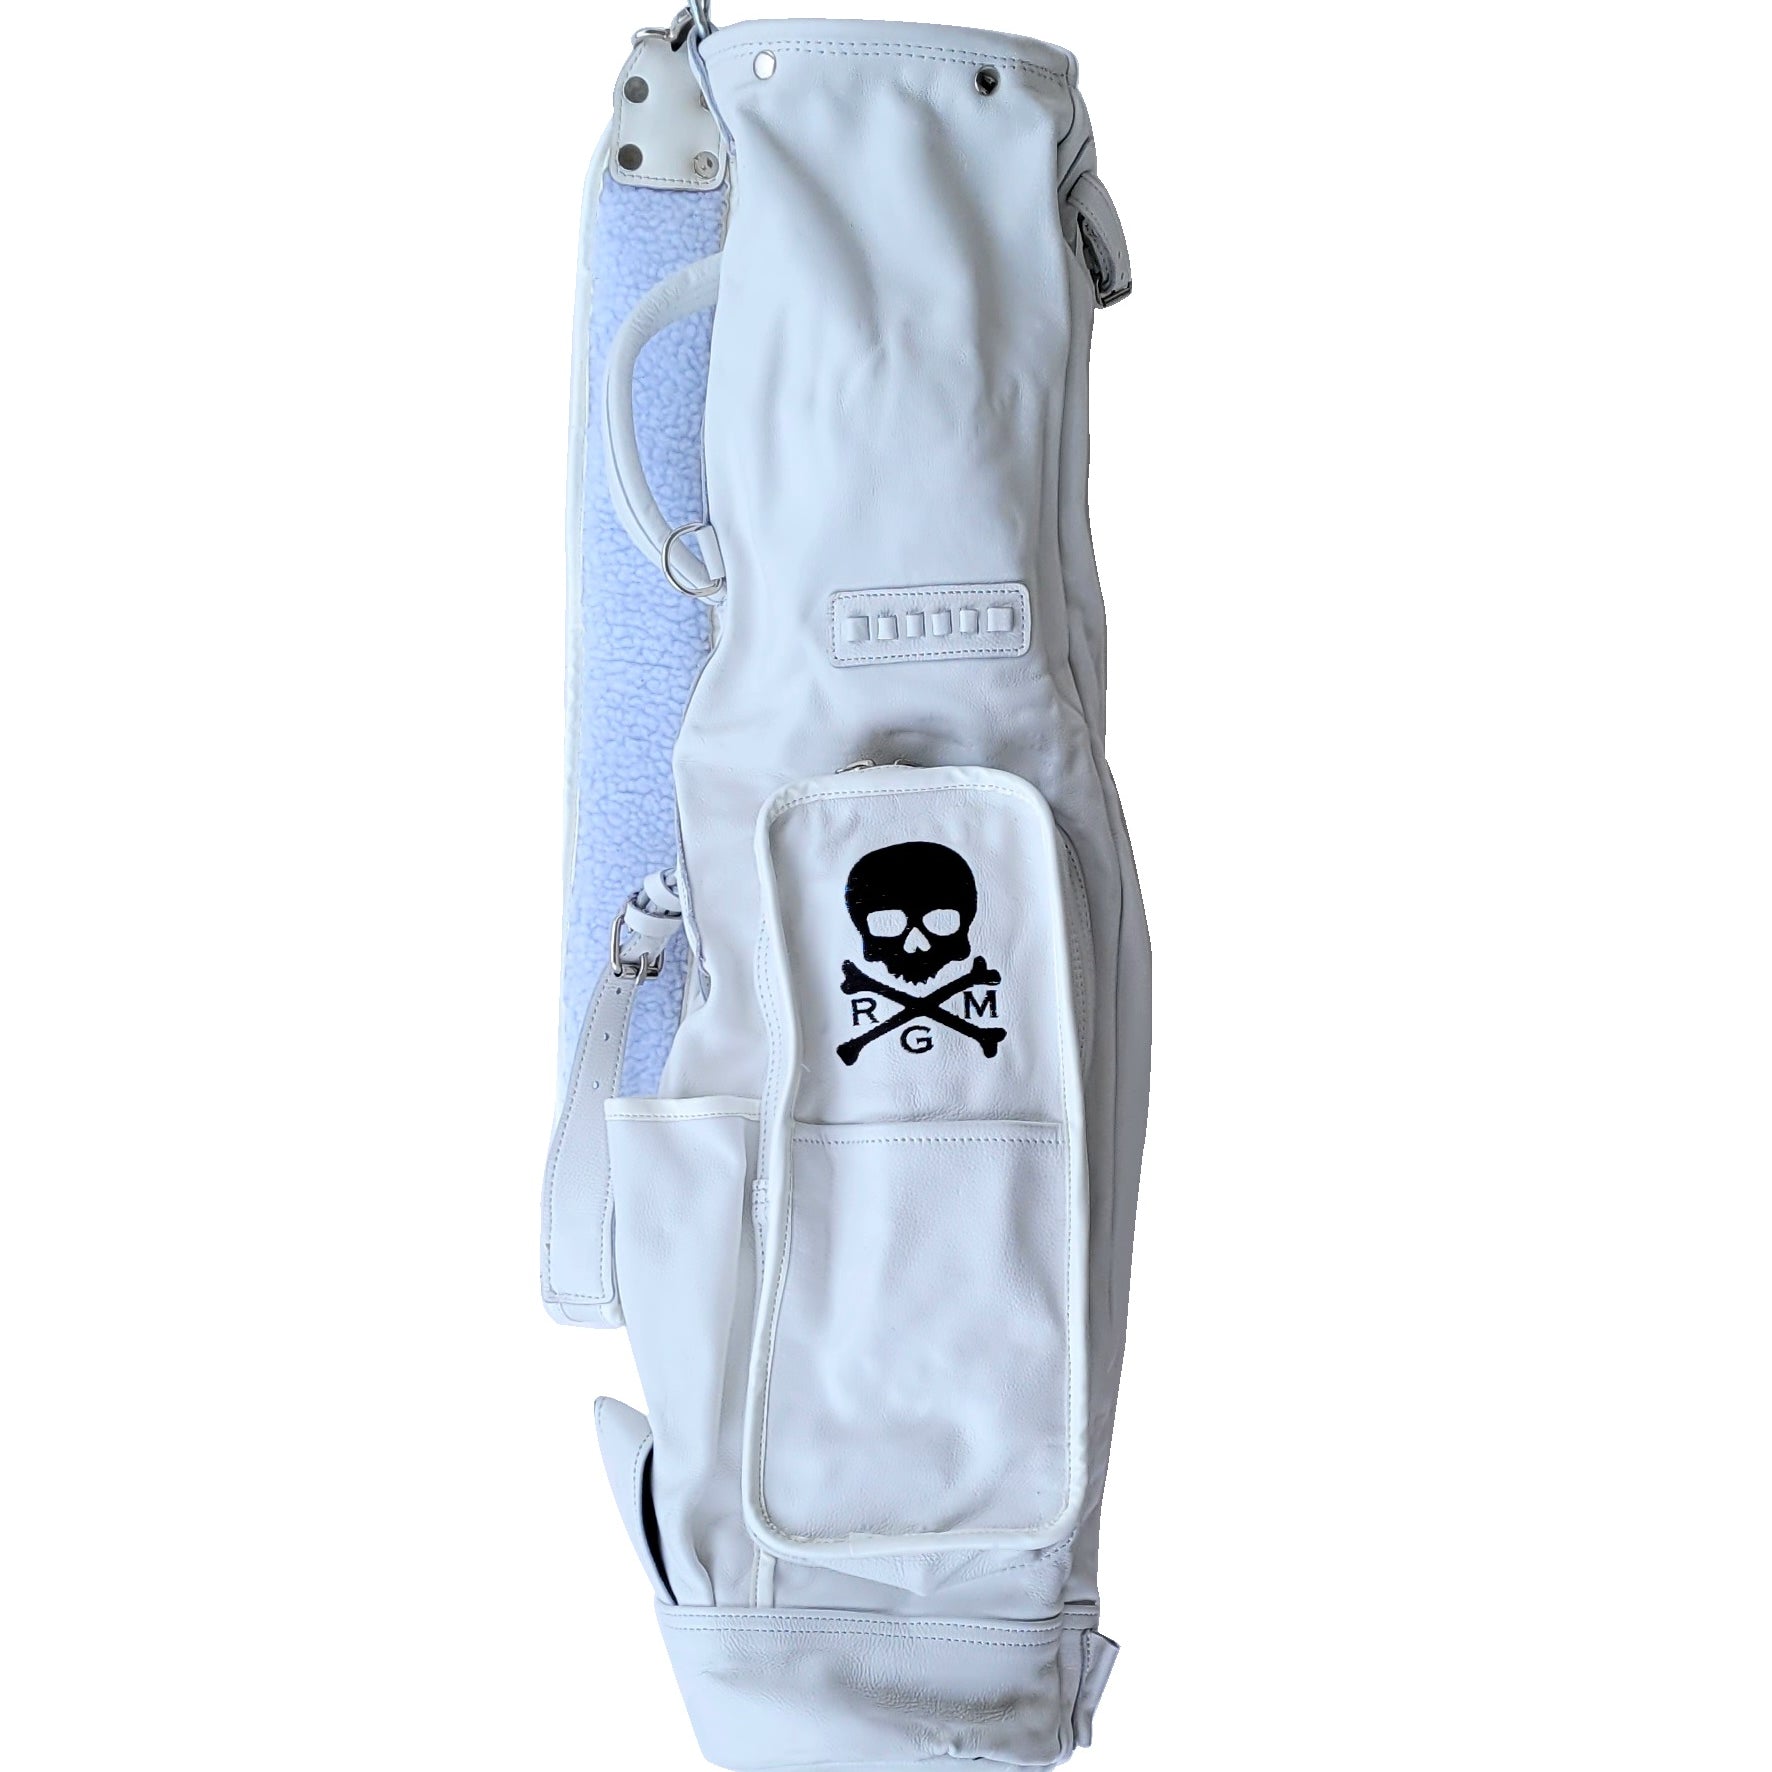 New Release! The 100% Leather, RMG Sunday Carry Golf Bag! Ships immediately!